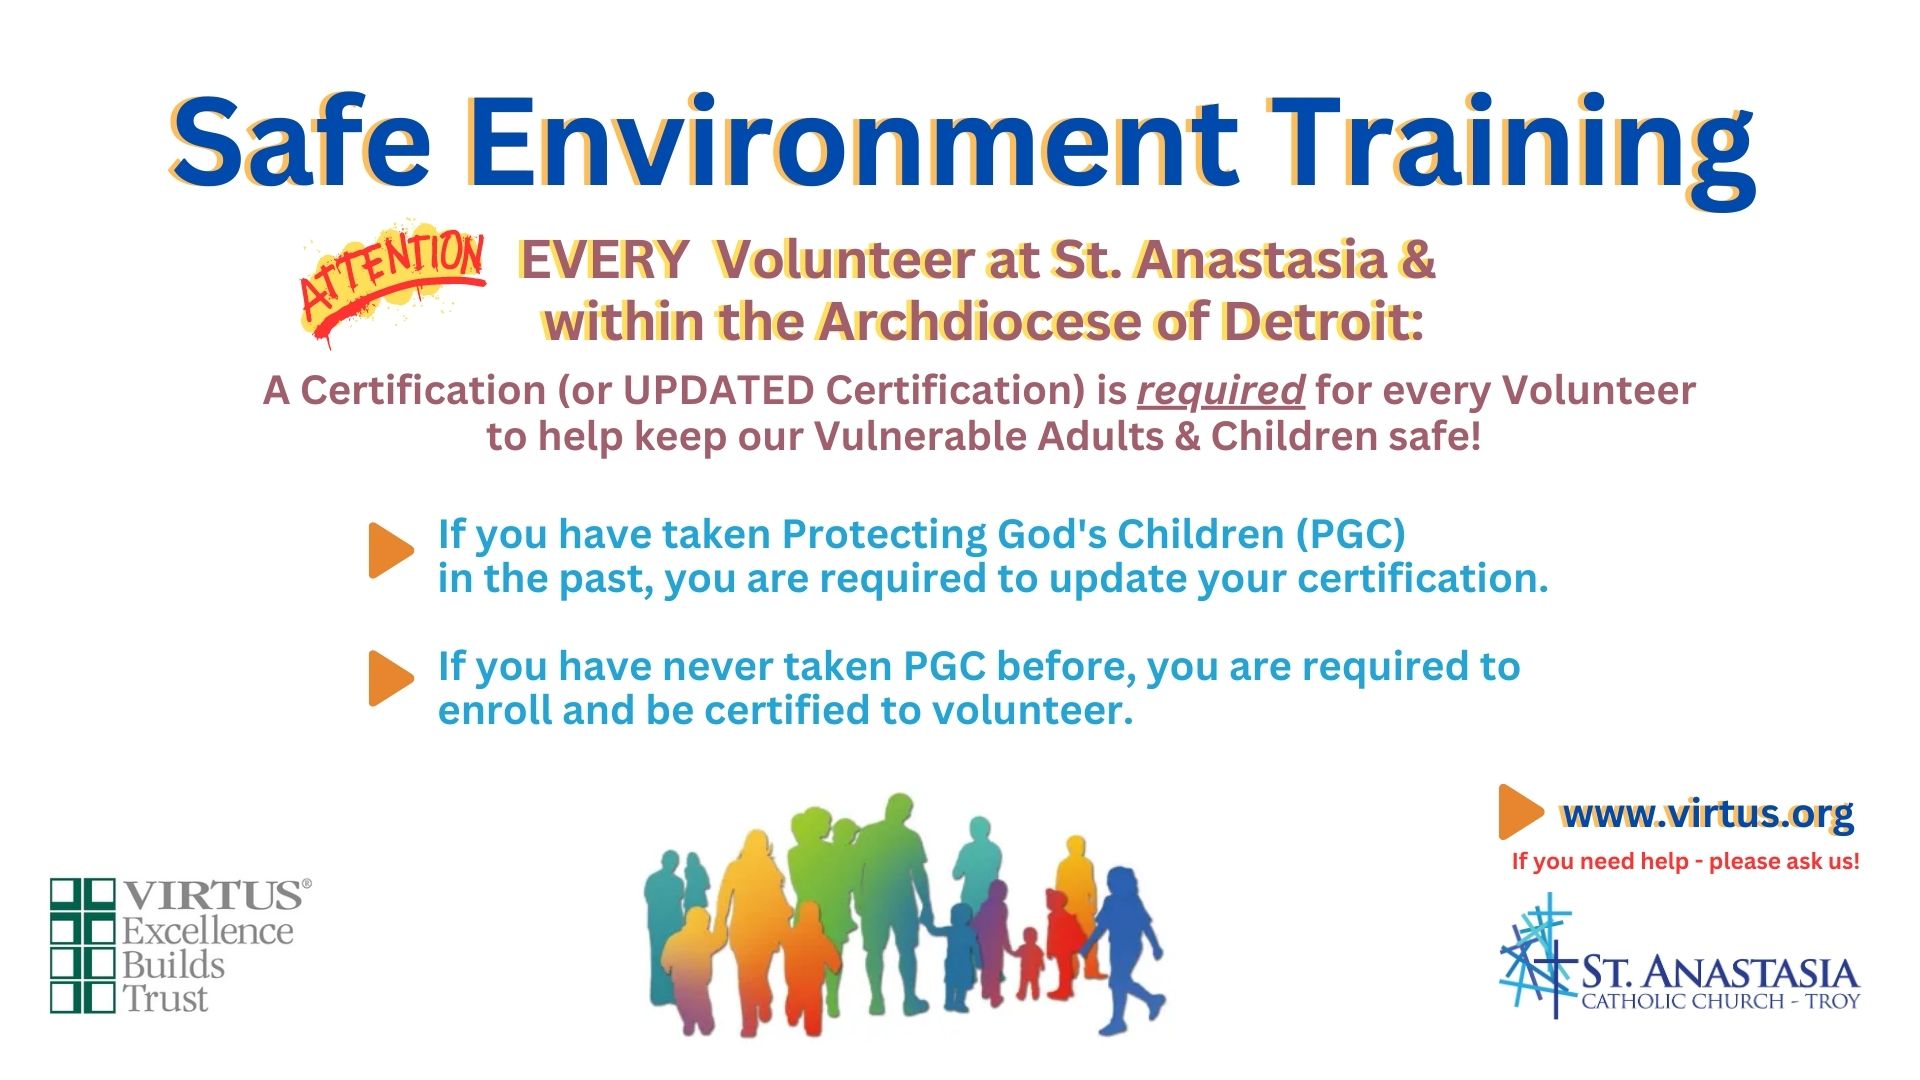 Safe Environment Training for every Volunteer